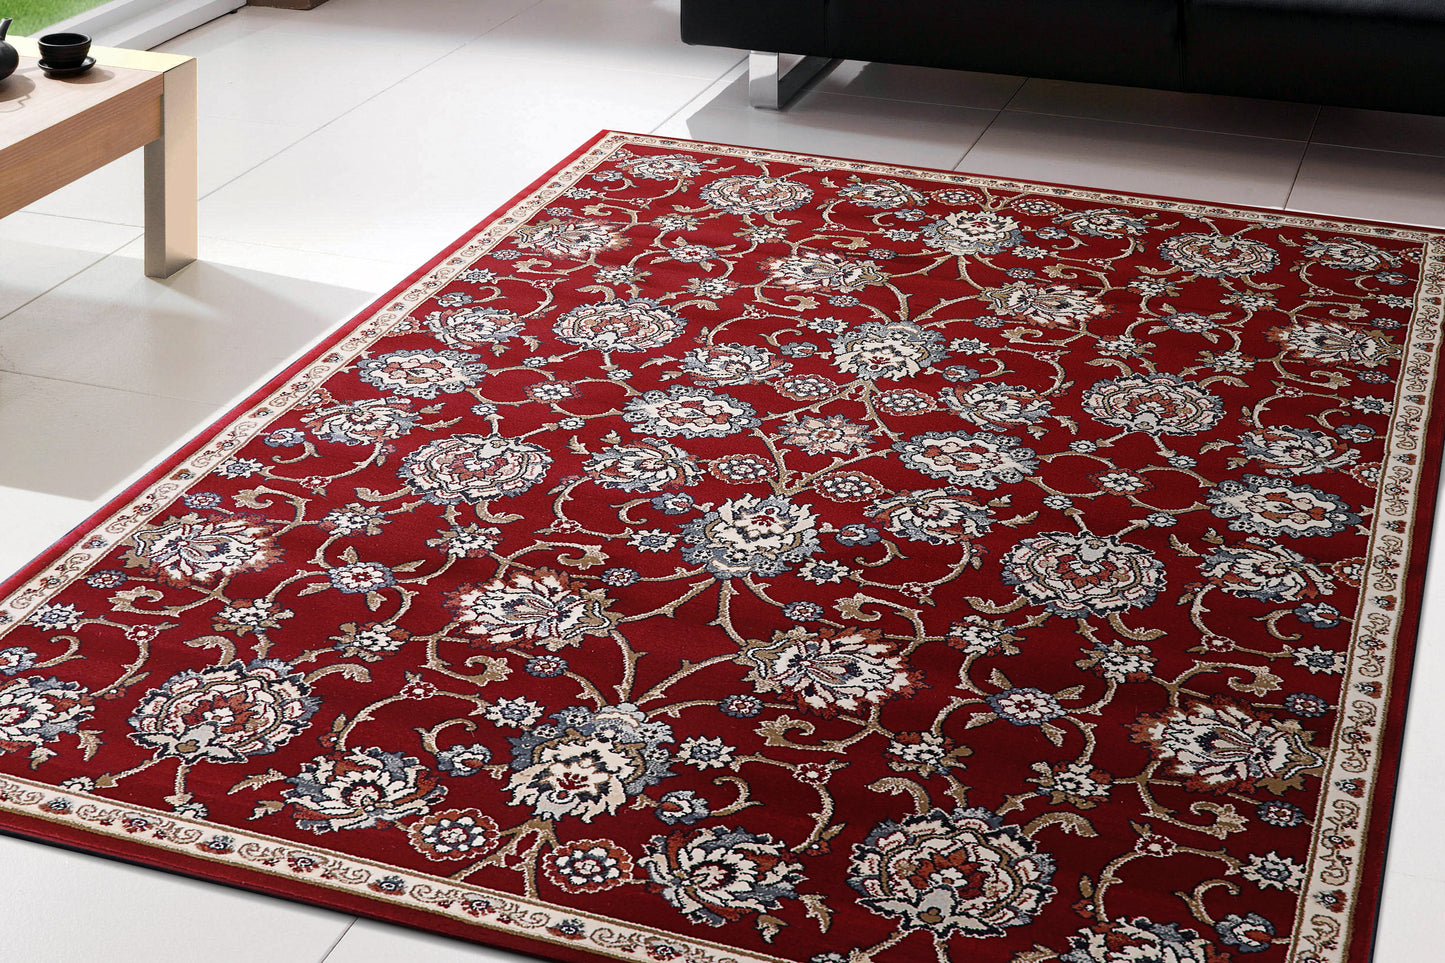 Melody 985020-339 Red Area Rug